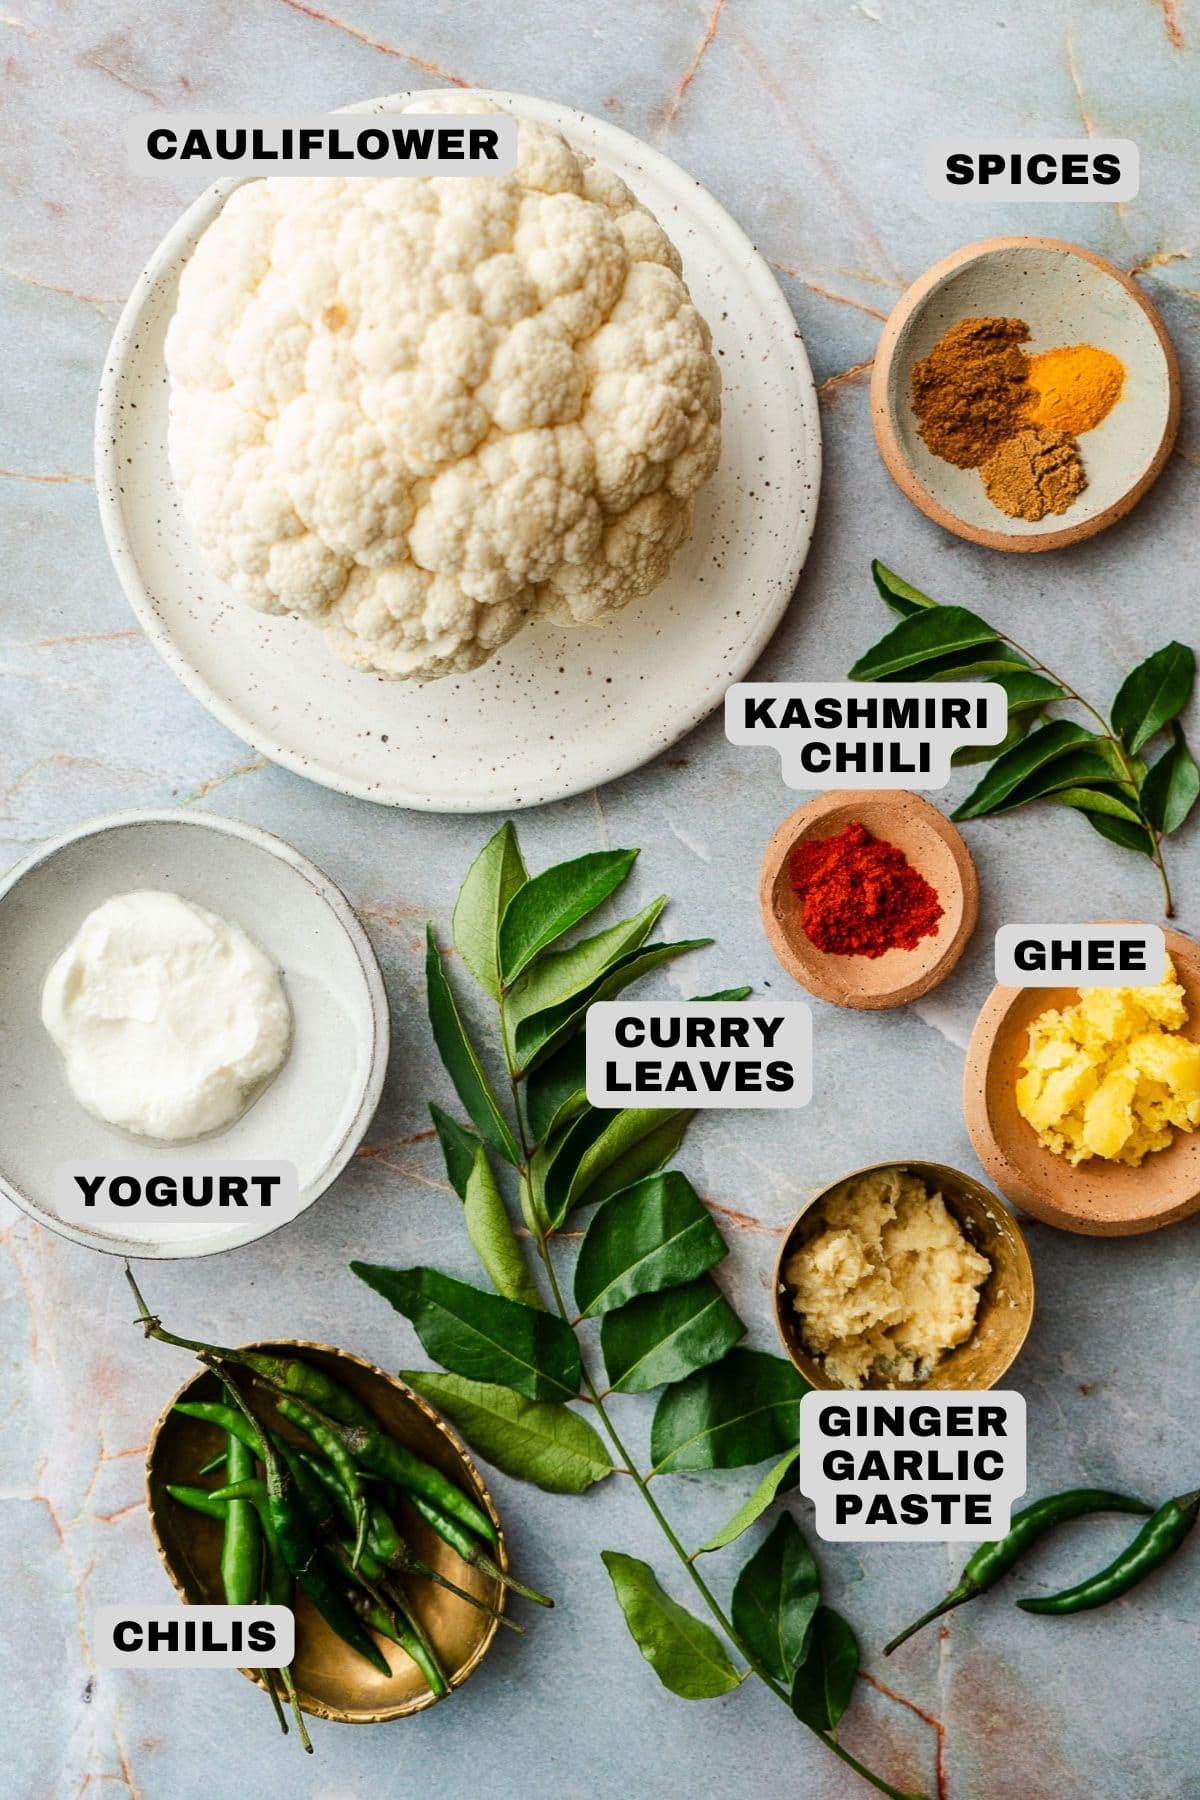 Cauliflower, spices, Kashmiri chili, curry leaves, ghee, ginger garlic paste, yogurt, and chilis ingredients with labels.